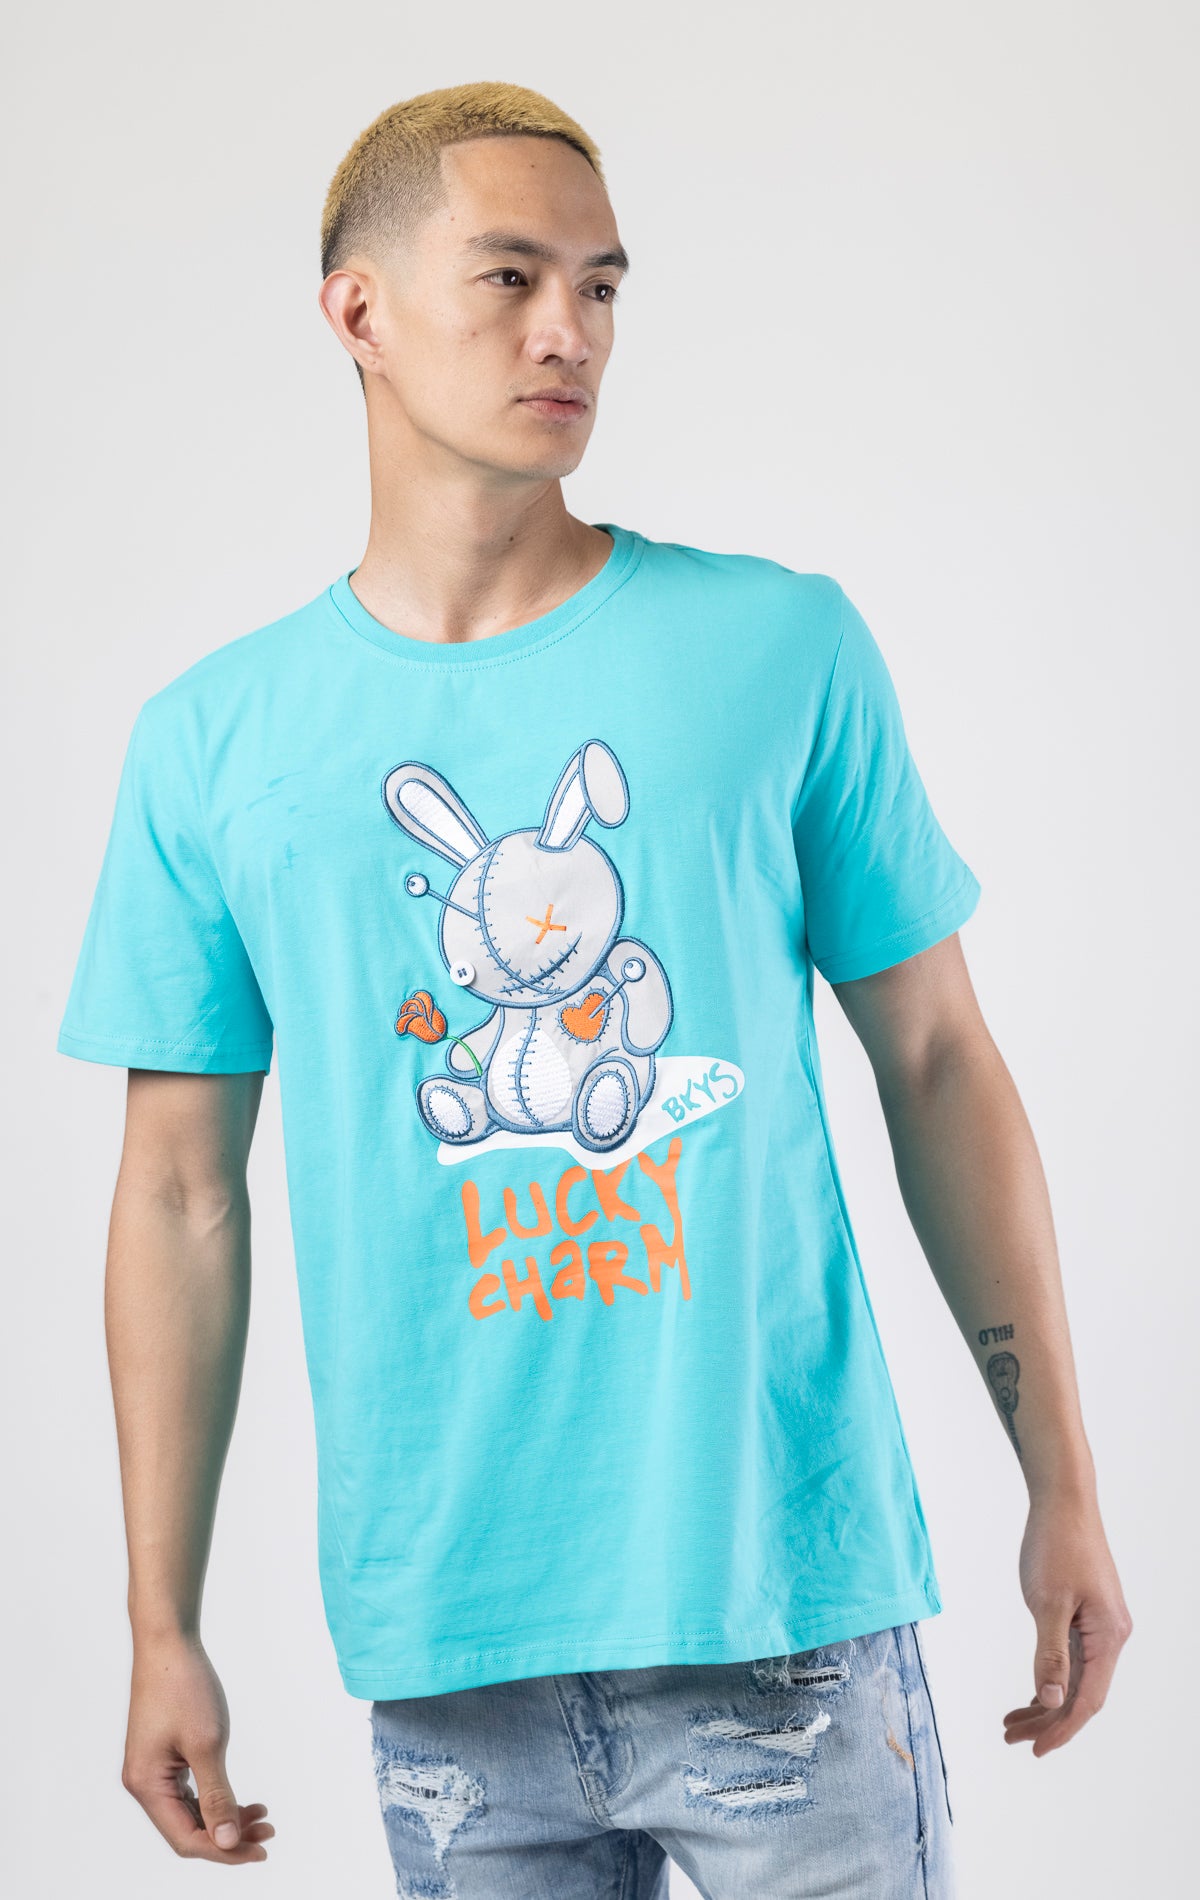 Miami blue Crewneck, short-sleeve BKYS Lucky Charm t-shirt with bunny graphic on front